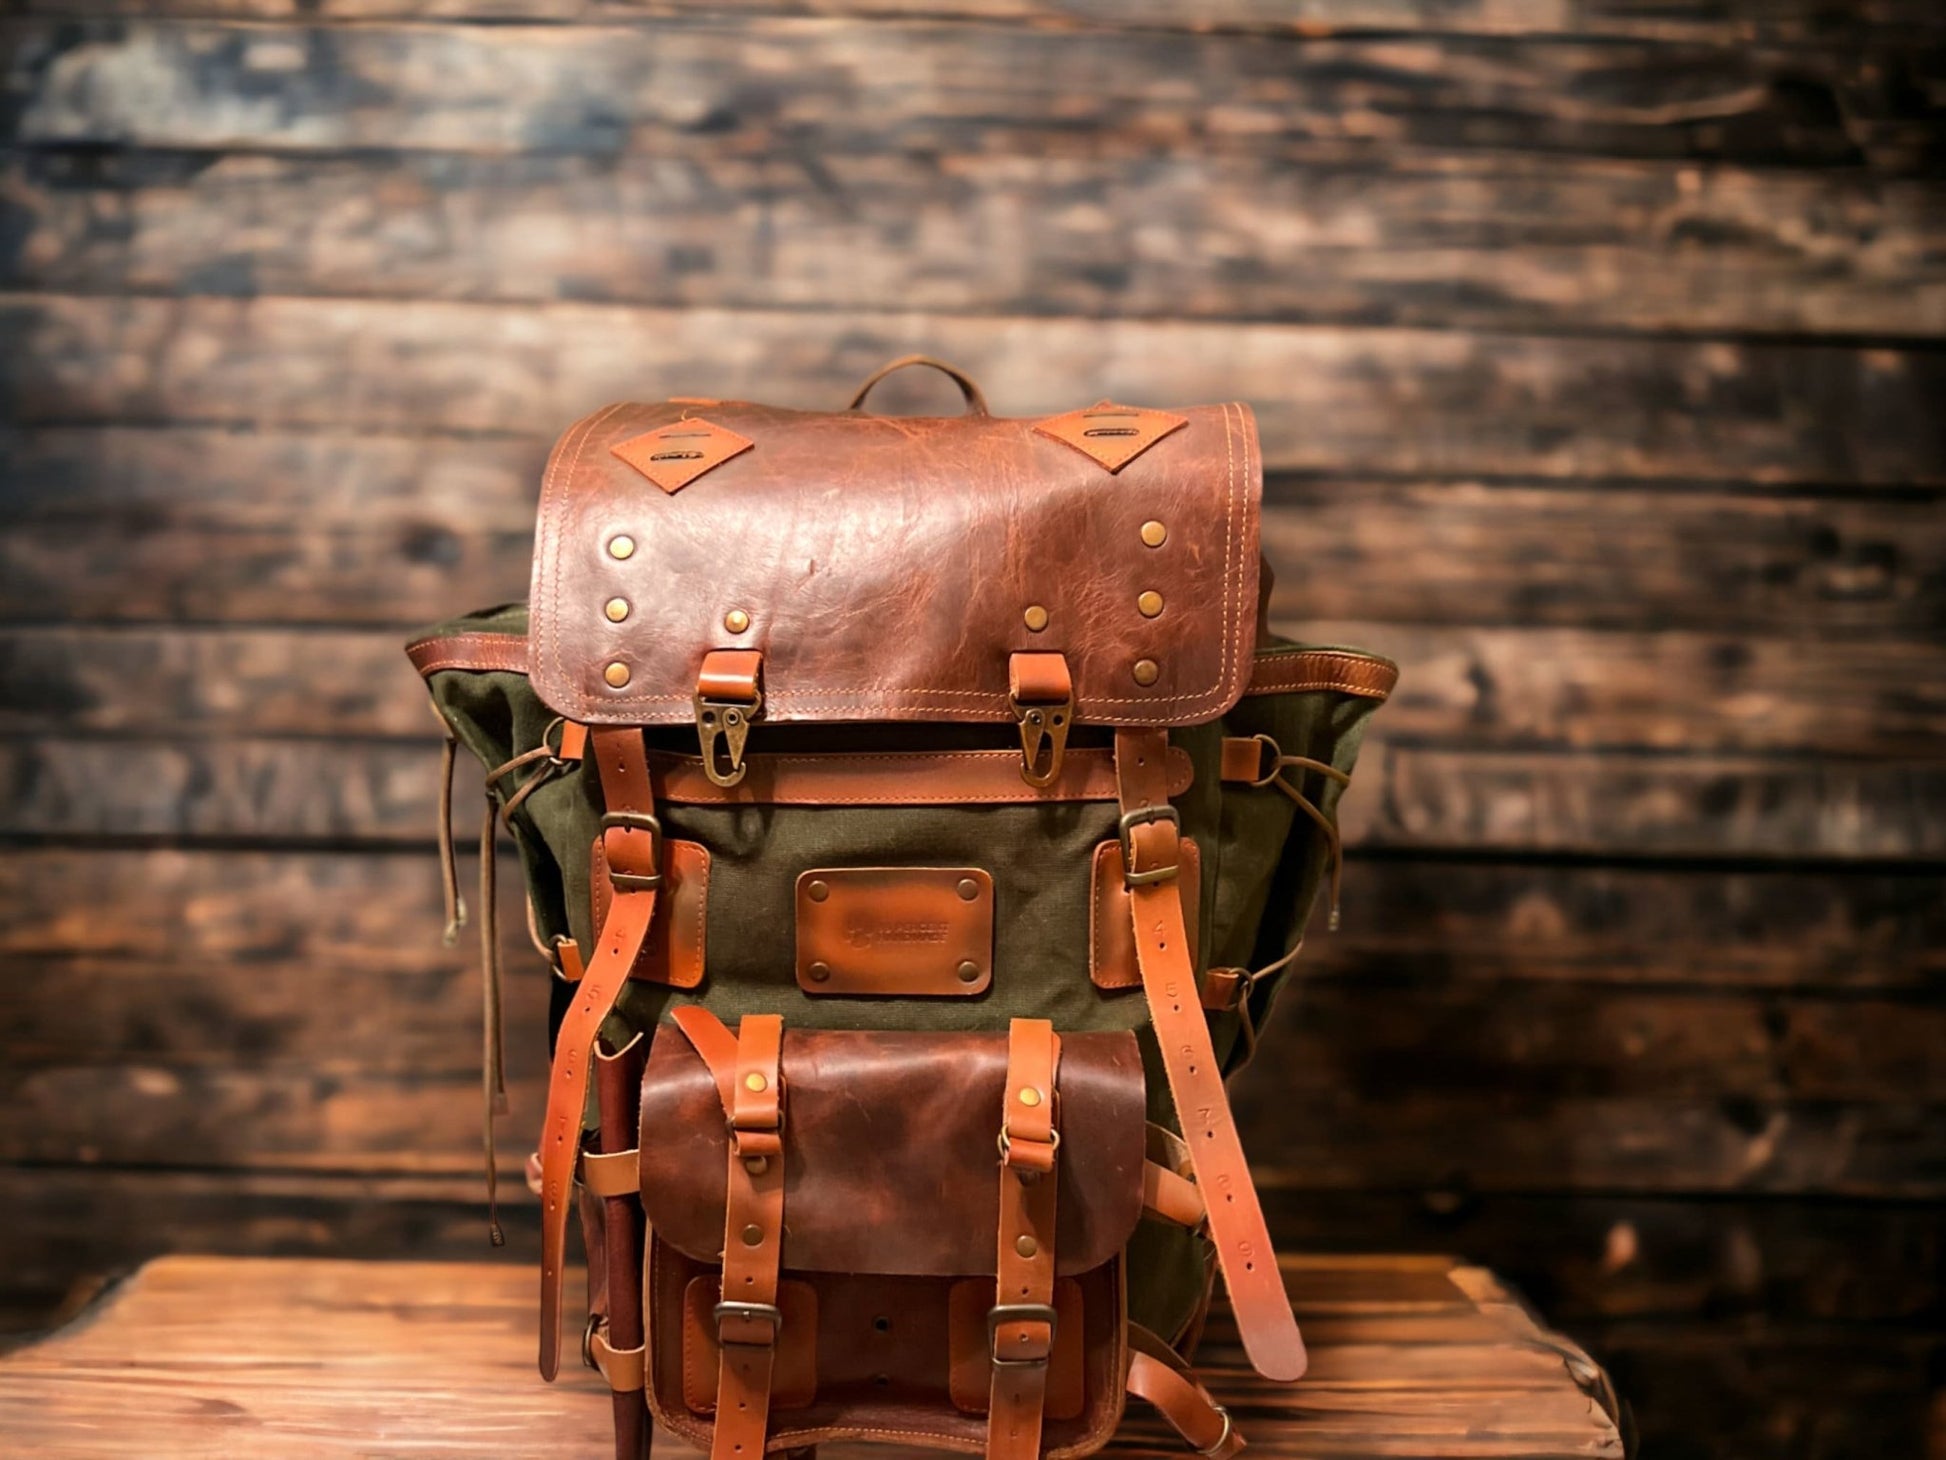 Handmade, Waxed Canvas Backpack, 50 L, Leather Backpack